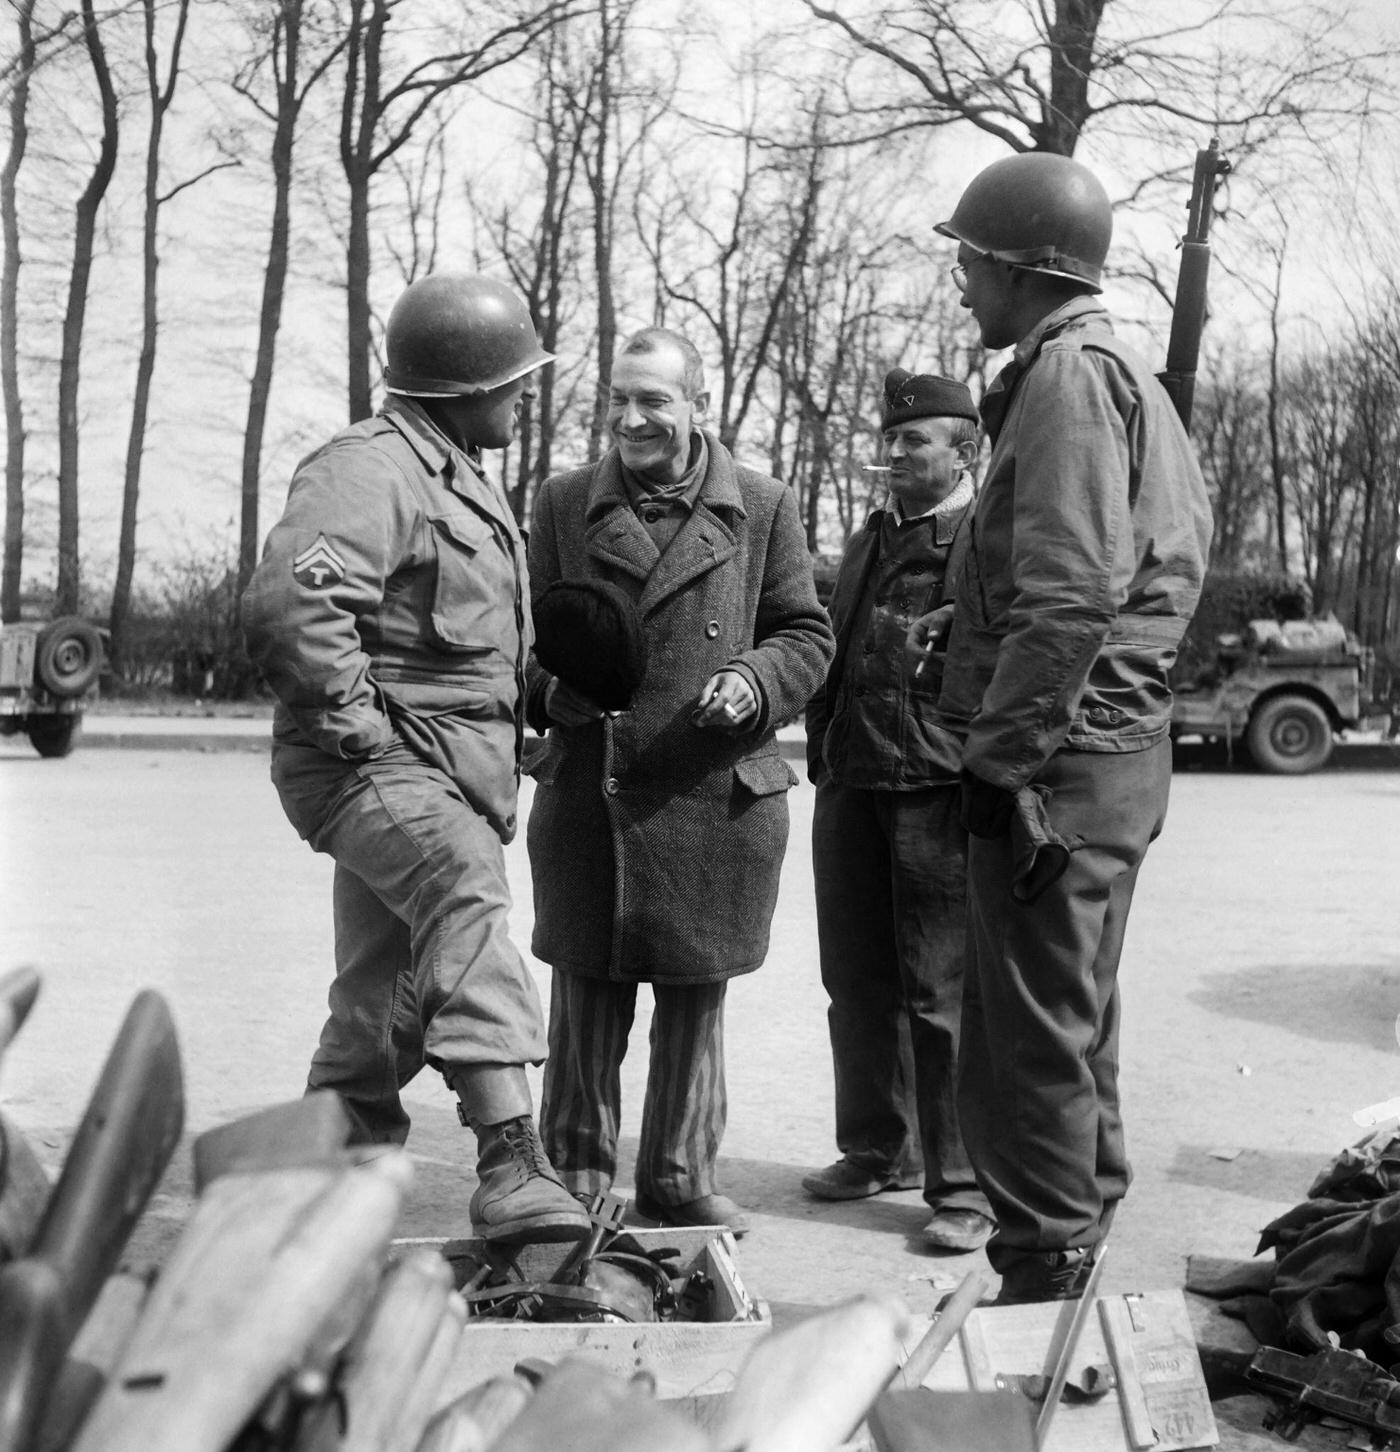 French prisoner commander Bellon chats with American soldiers in front of a pile of weapons belonging to the SS at Buchenwald Nazi camp, April 12, 1945.